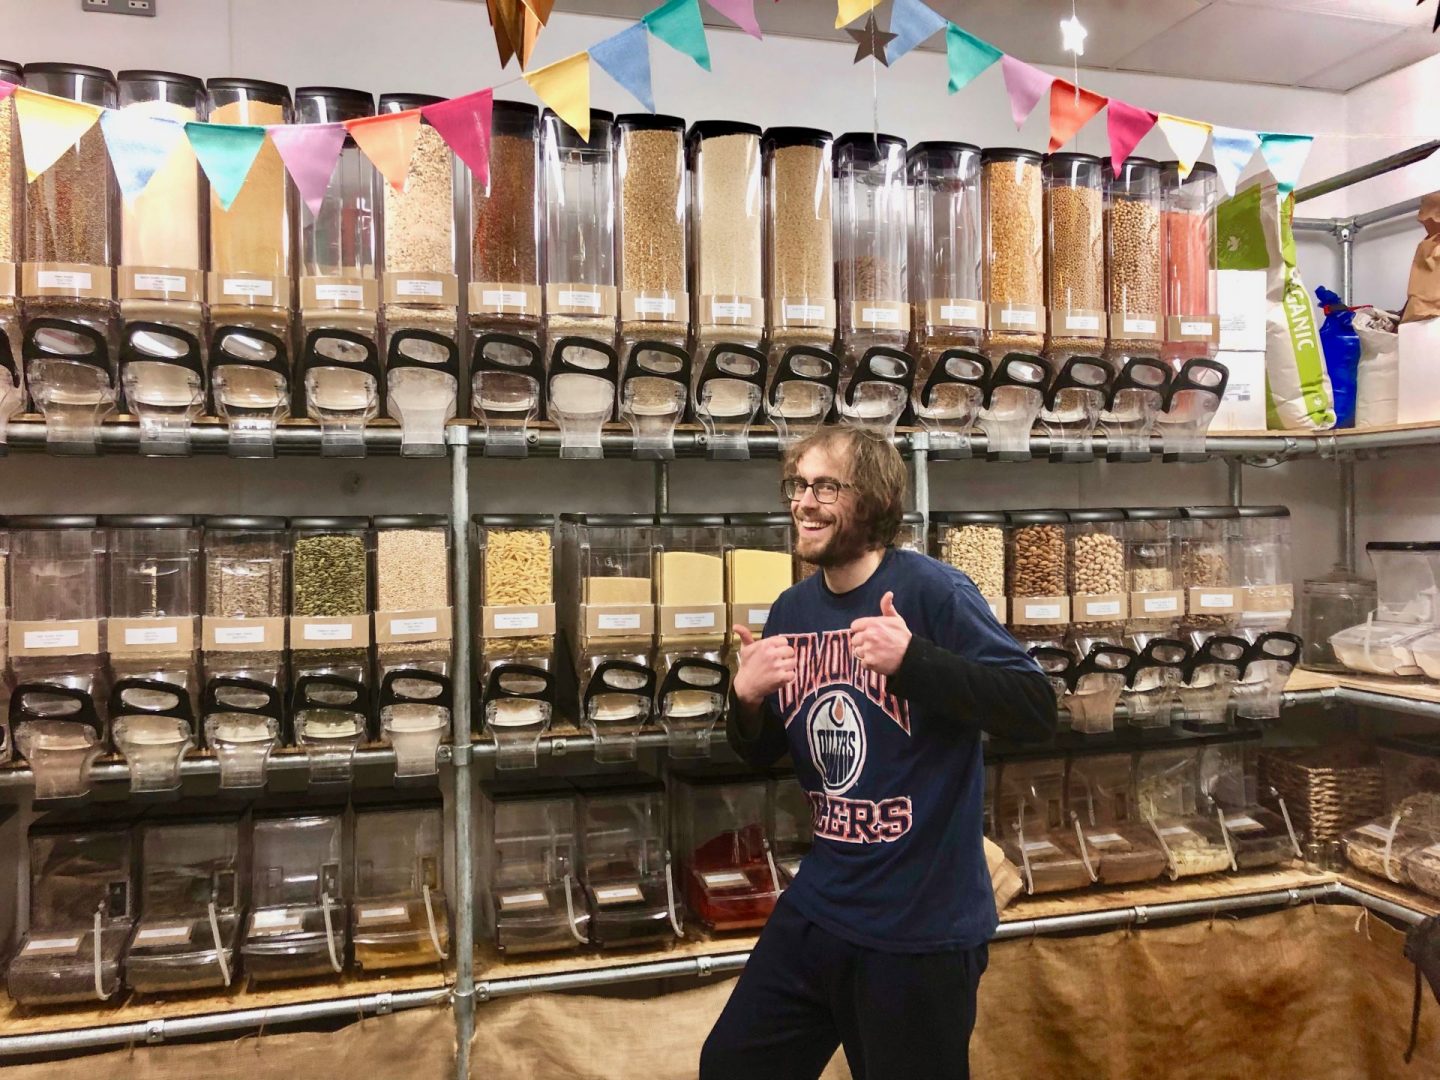 The inside of Jar Tree in Leeds Kirkgate Market showing products lined up in containers and the shop owner smiling and giving a thumbs up at the camera